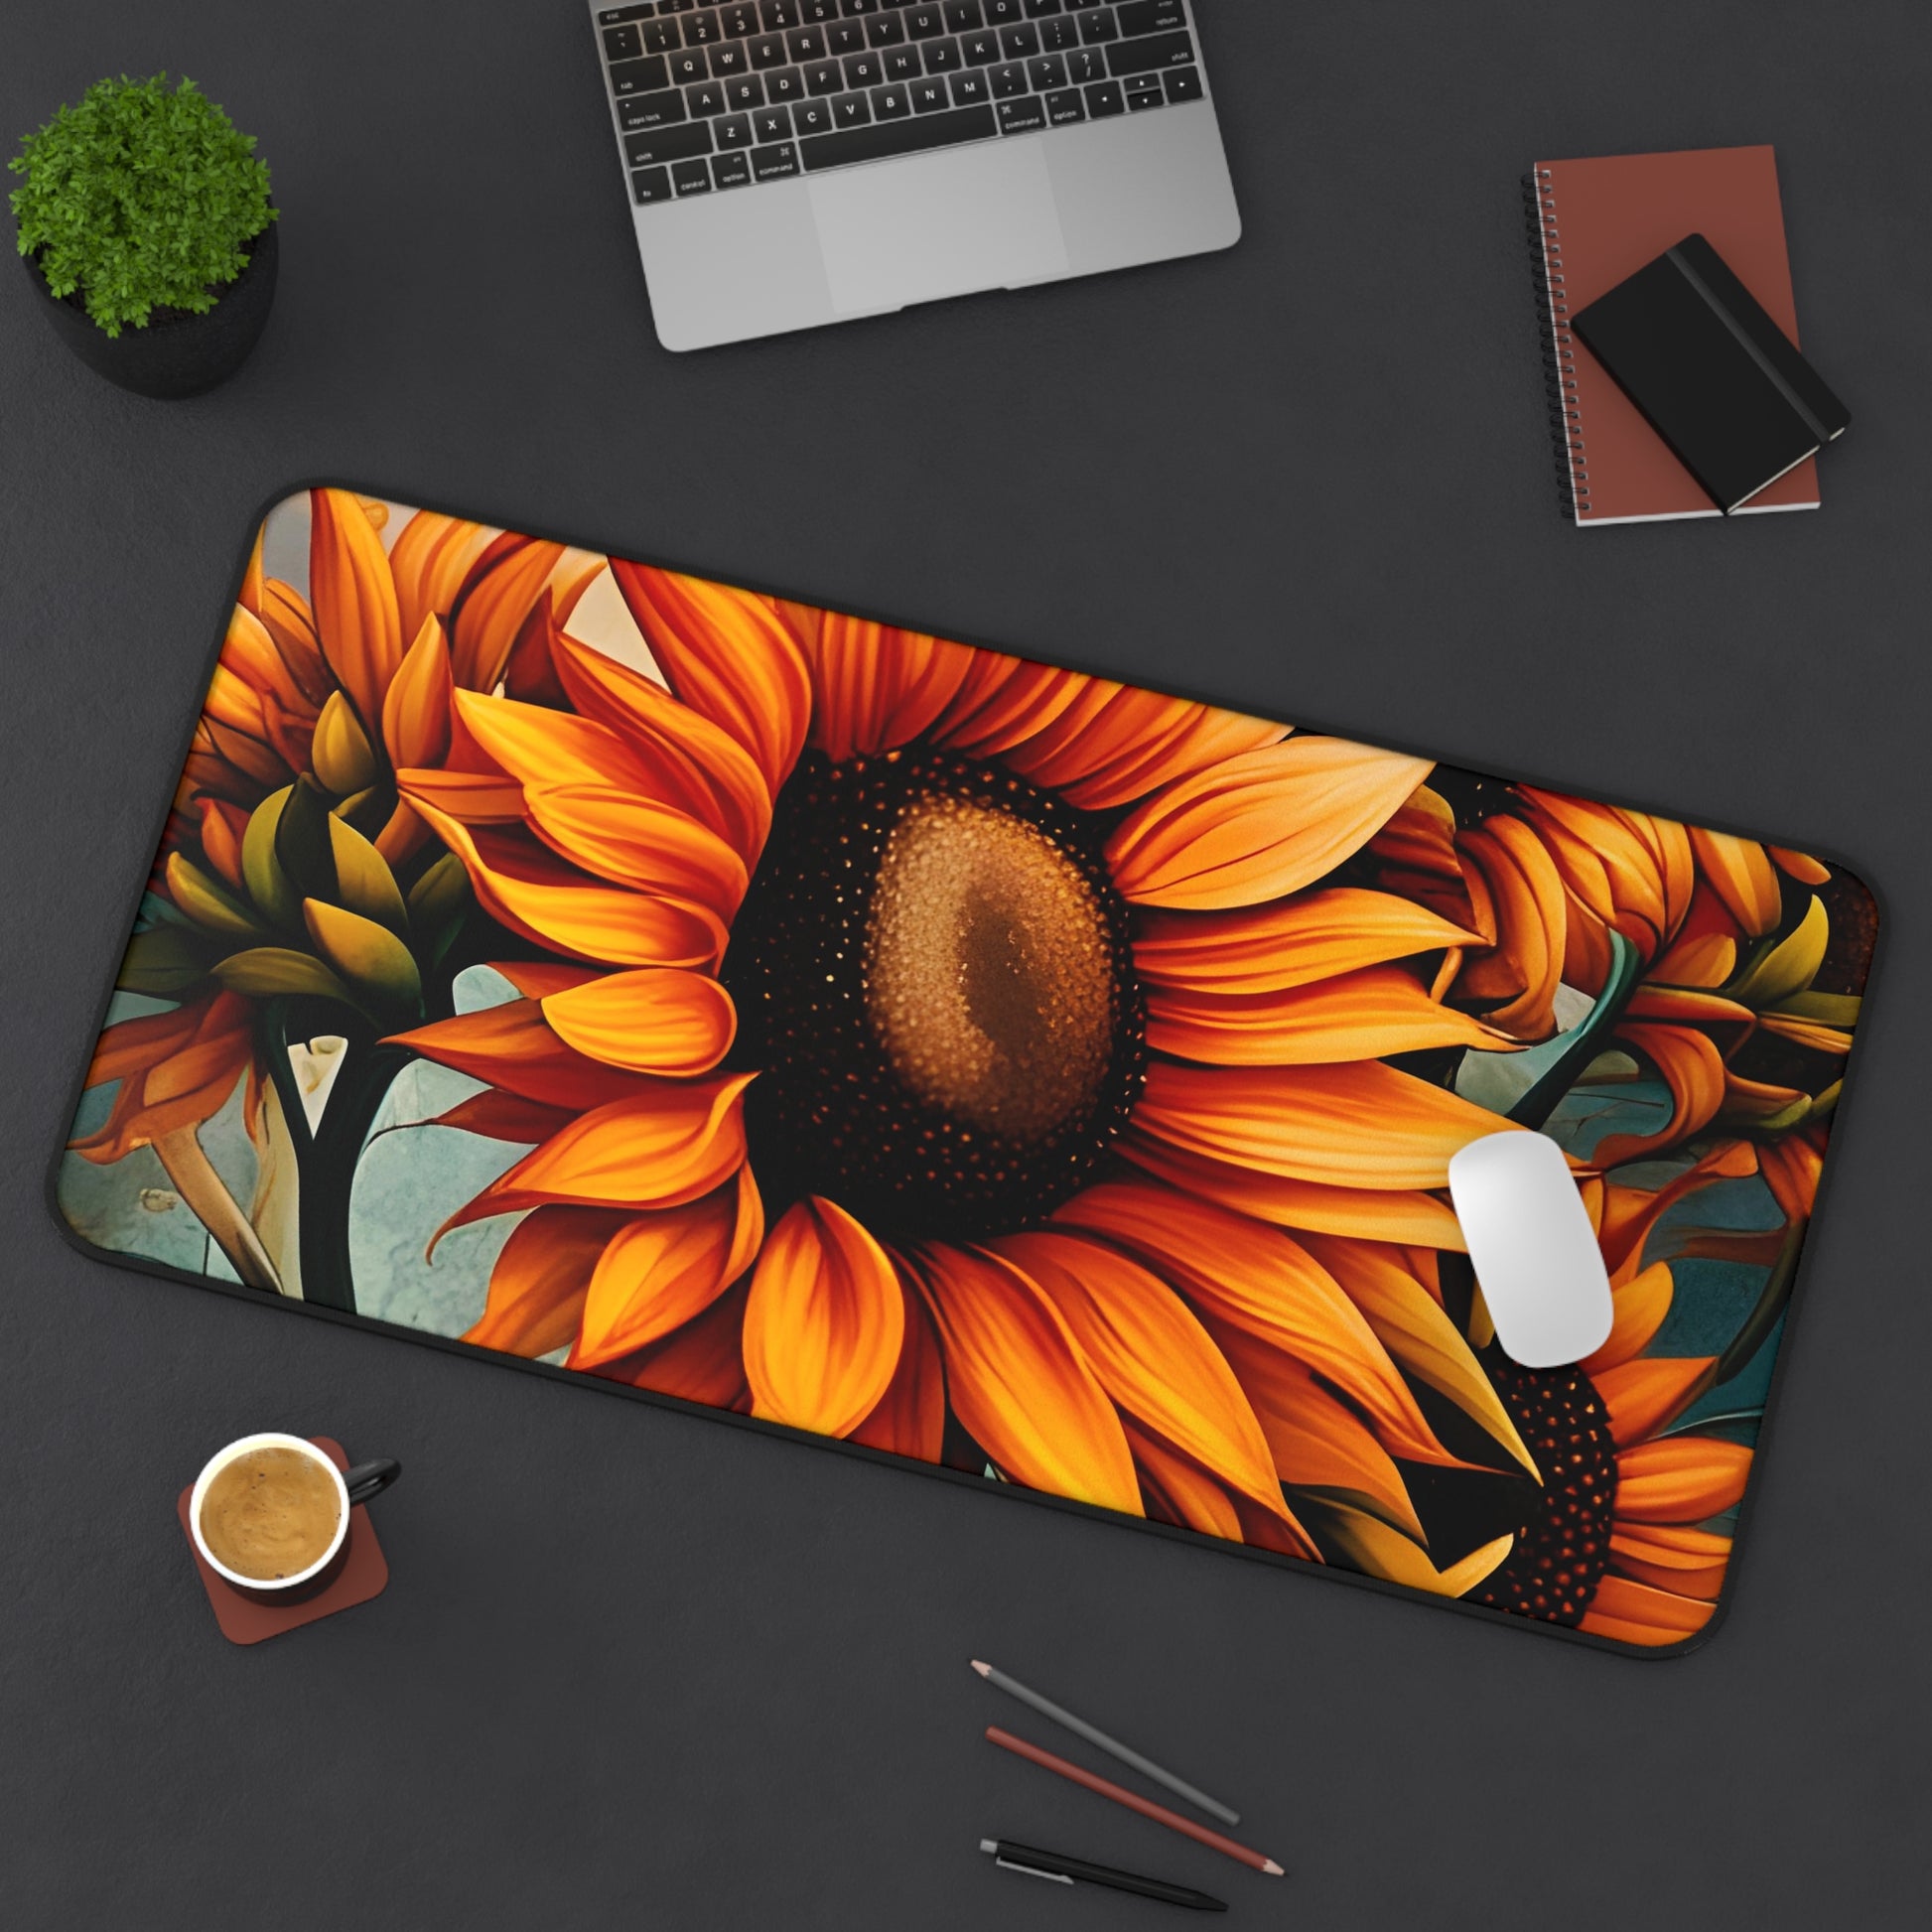 Sunflower Crop on Distressed Blue and Copper Background Printed on Desk mat 15x31 on desk